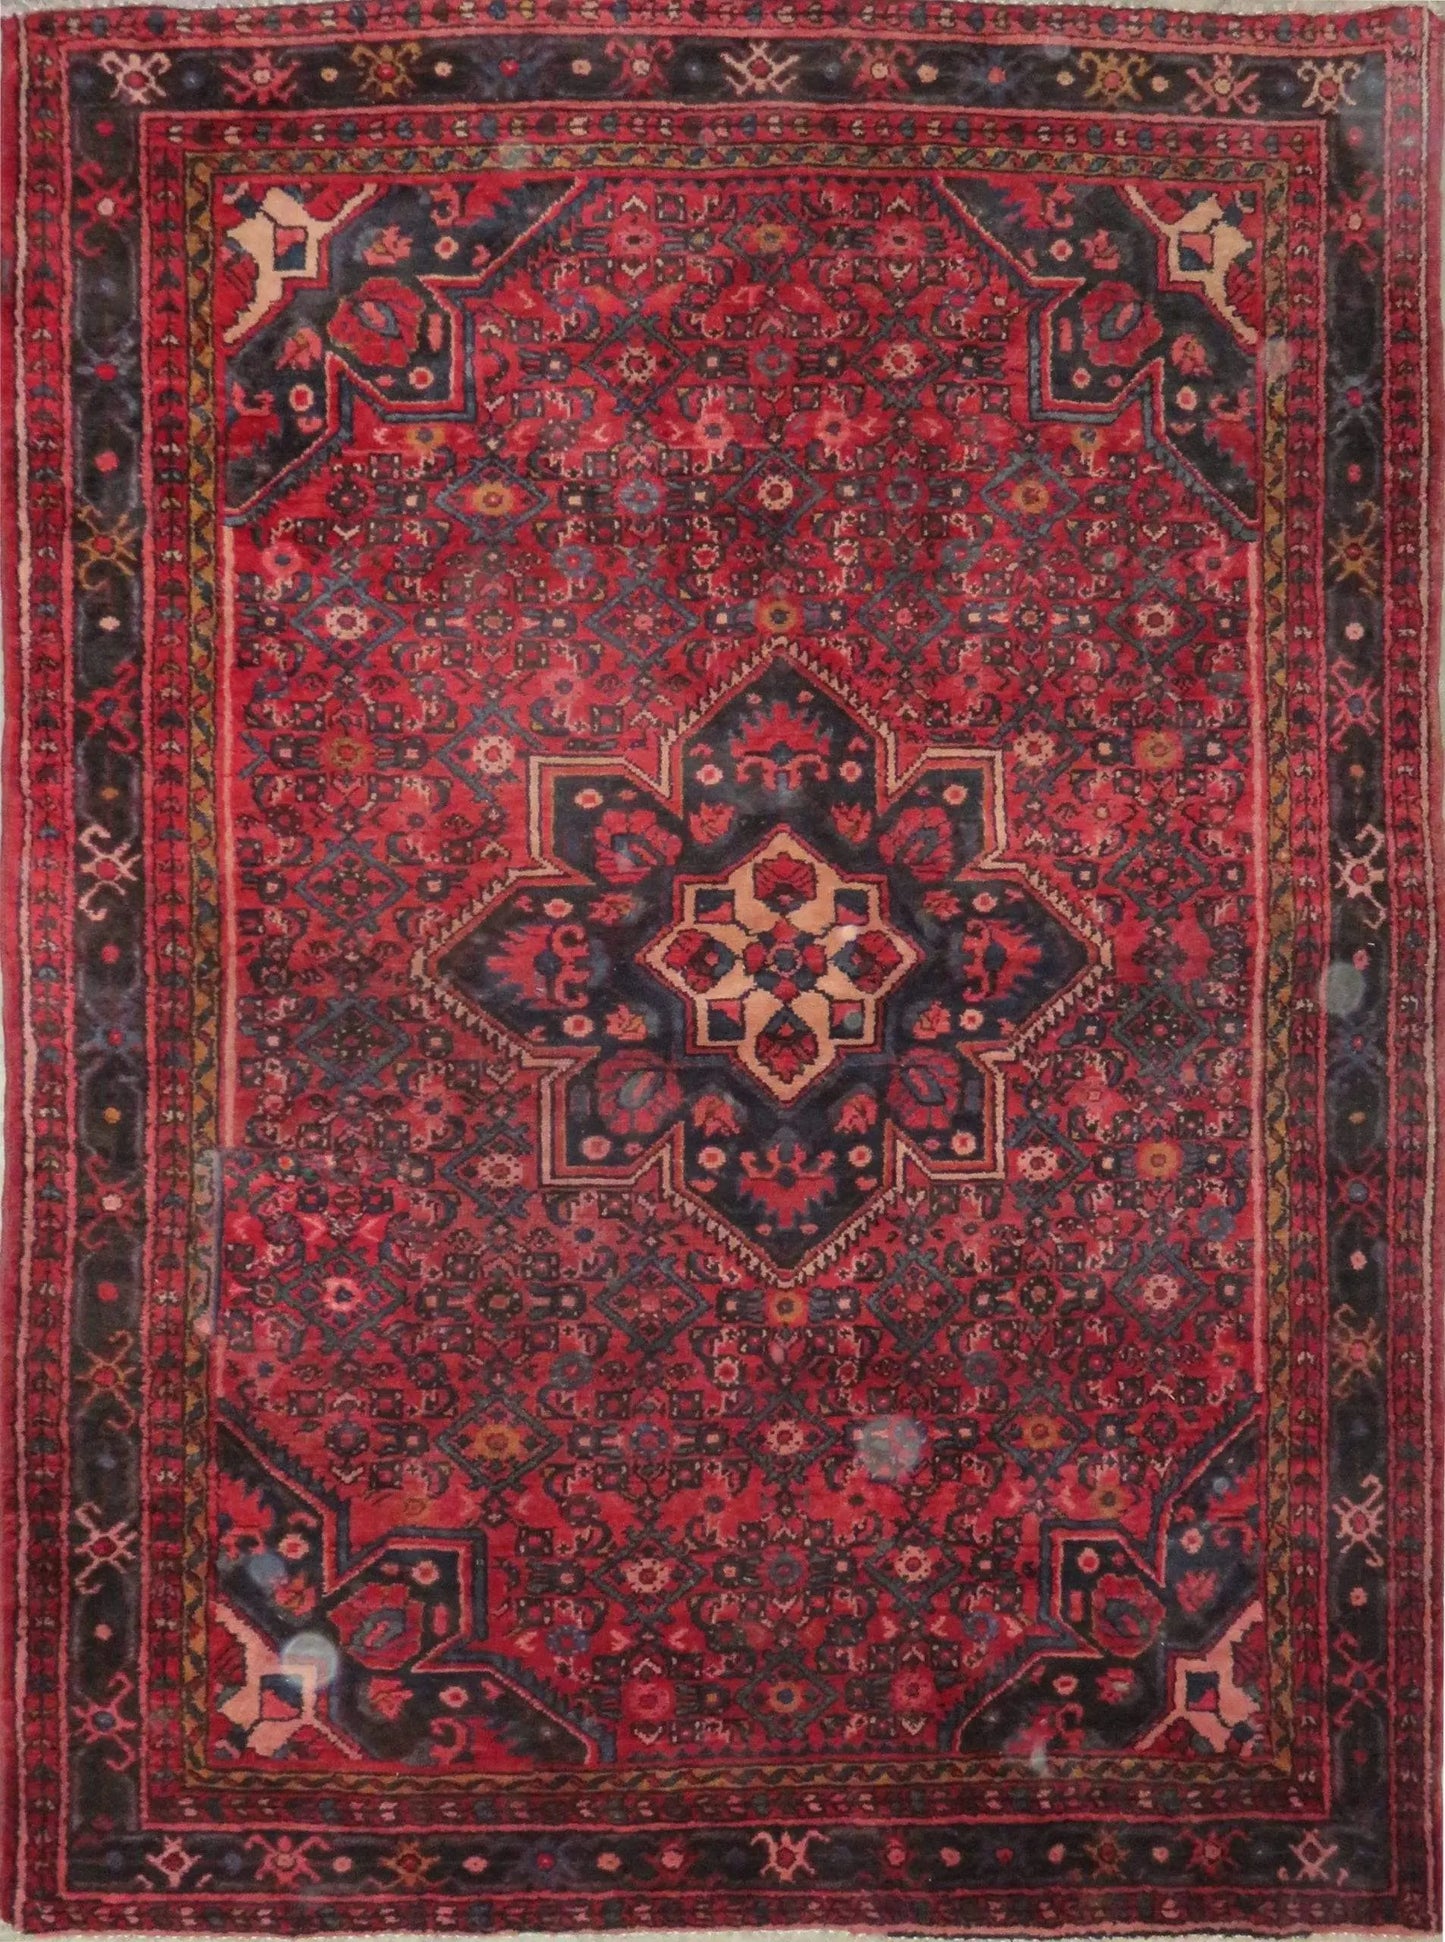 Hand-Knotted Persian Wool Rug _ Luxurious Vintage Design, 6'8" x 4'10", Artisan Crafted